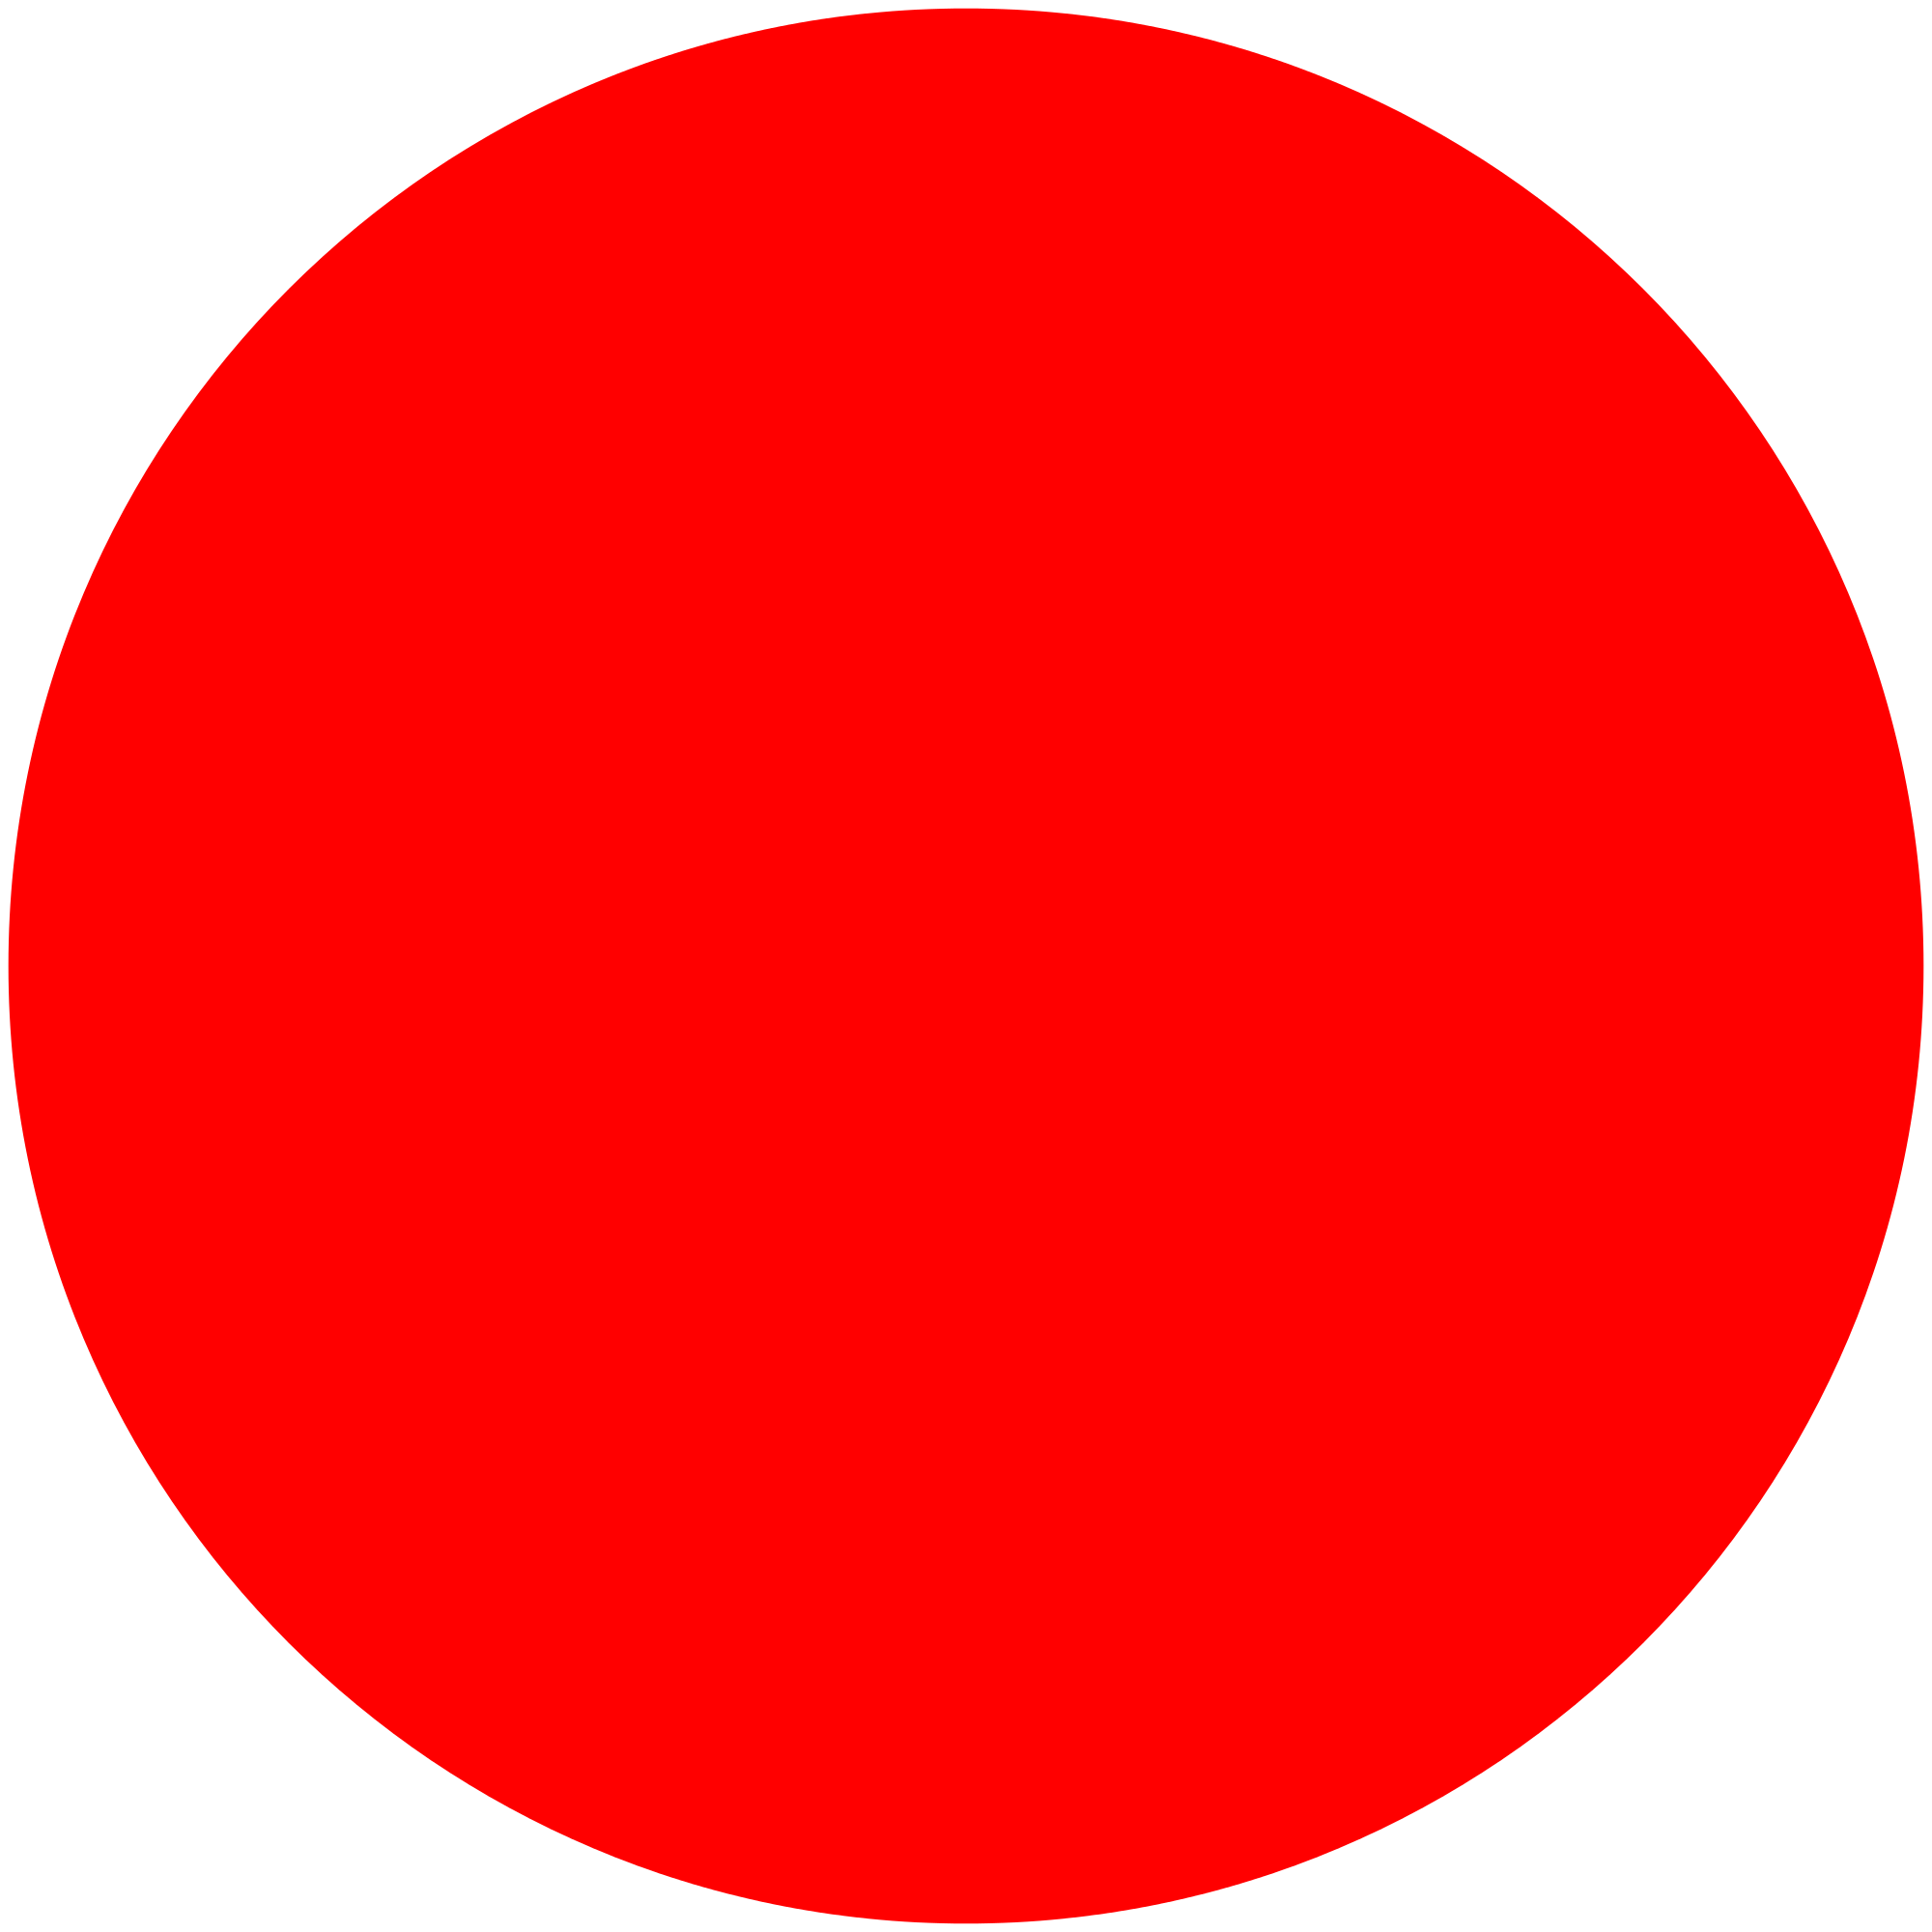 Red Circle Transparent Background Png : Circle Red Transparent ...